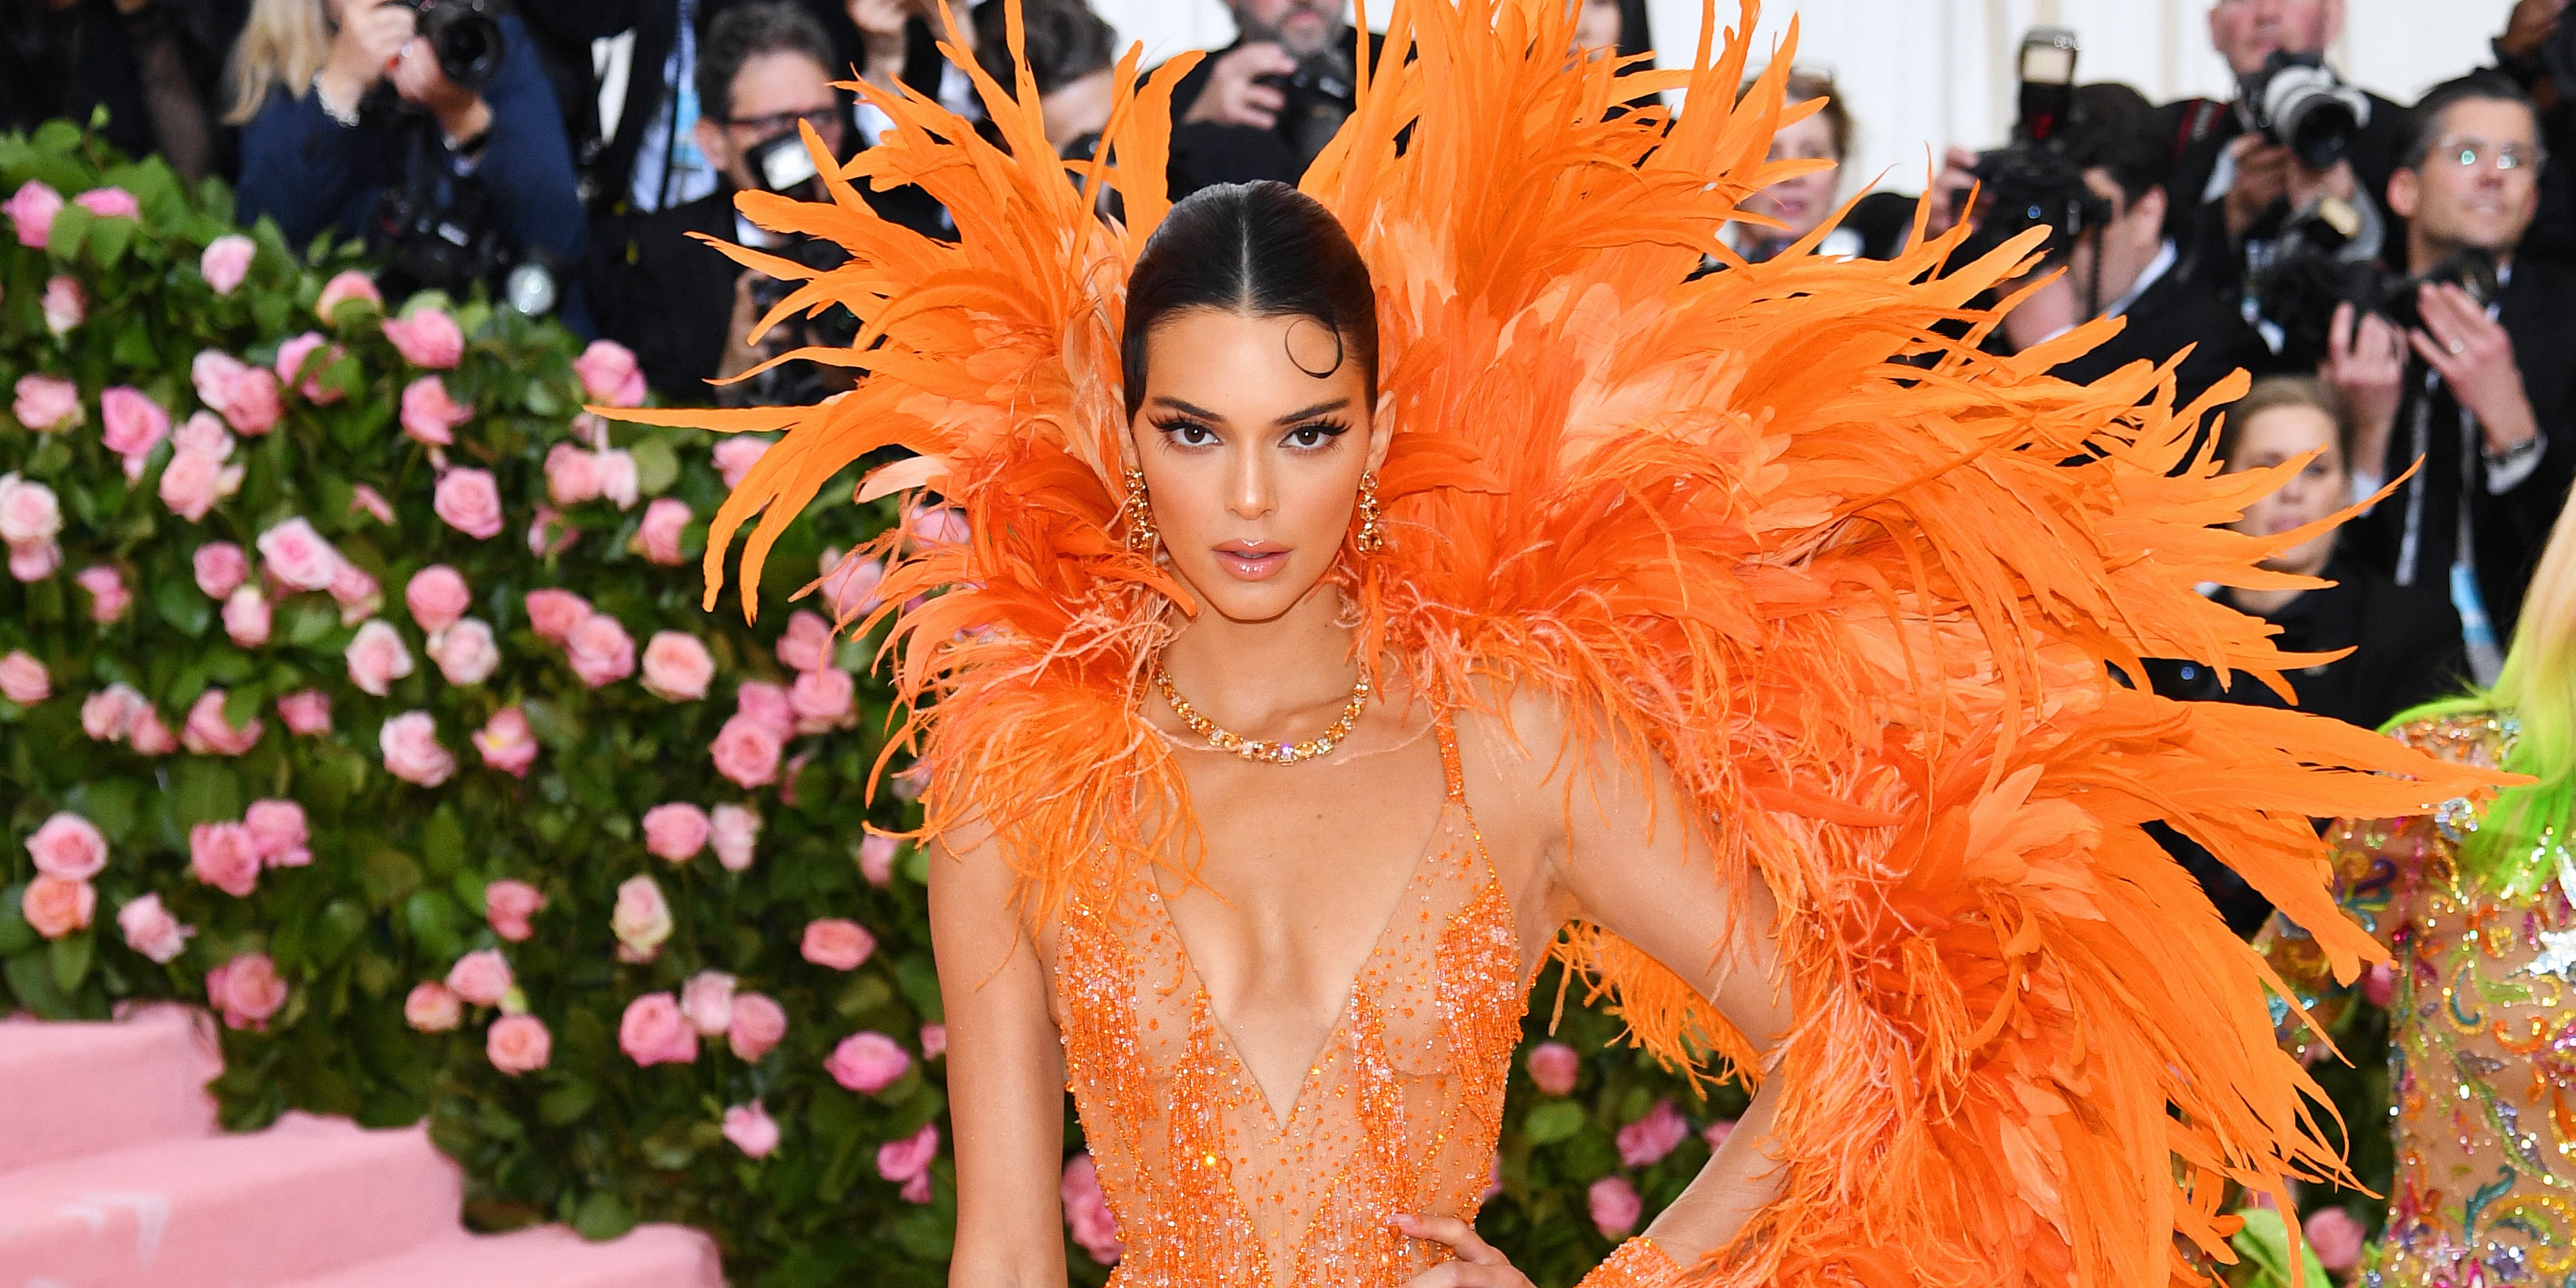 Met Gala 2019: Kendall Jenner showcases her statuesque figure in orange  feathered Versace gown